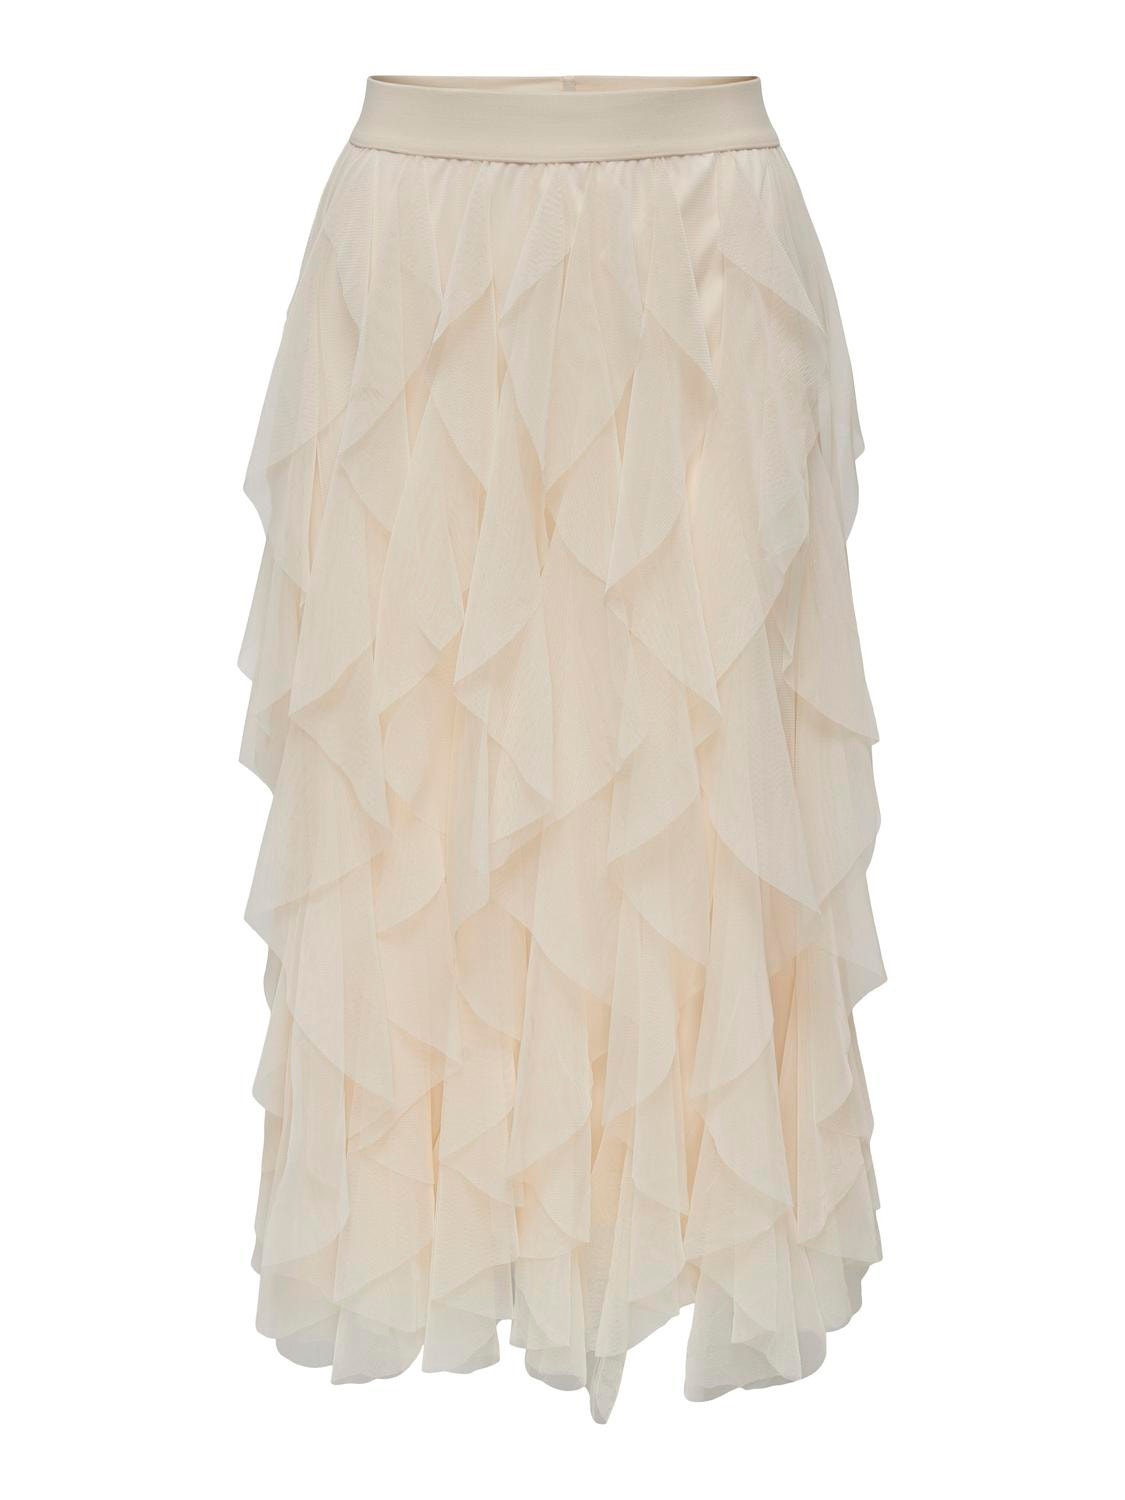 ONLY Midi skirt with frills -Birch - 15201888